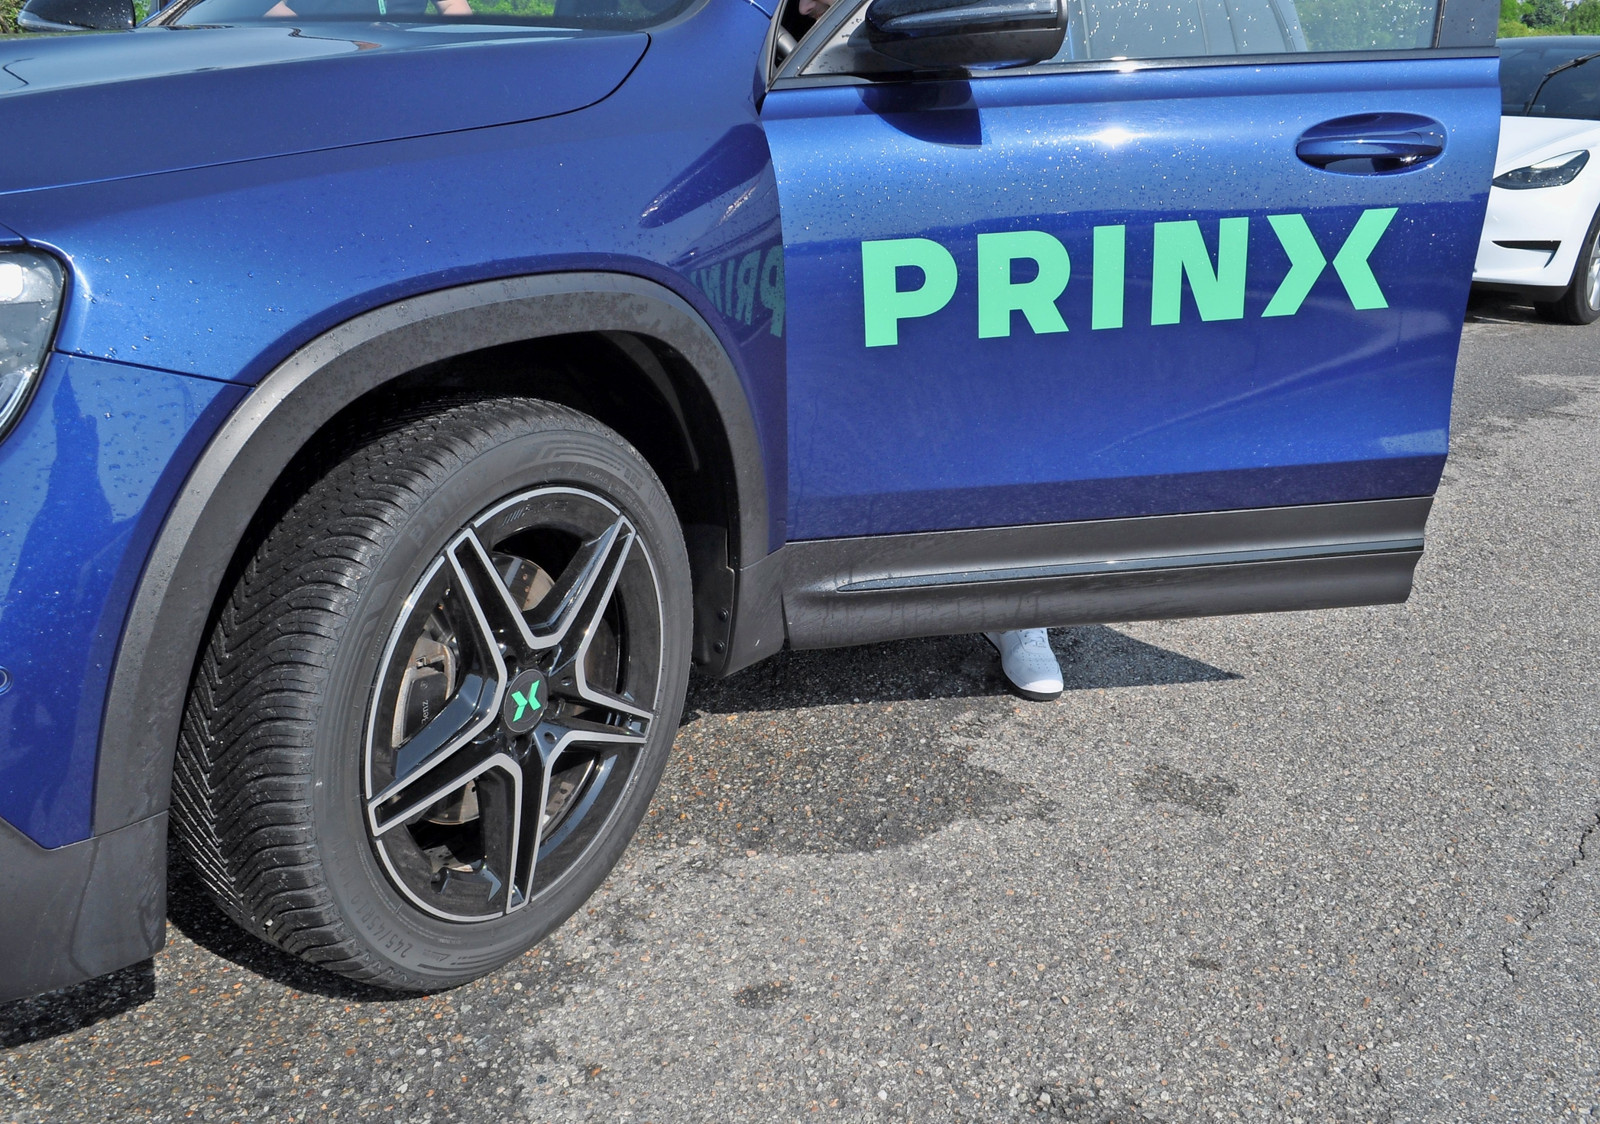 The all-year tyre Quattura 4S is already available in the market as one of the first representatives of the new Prinx range of products.